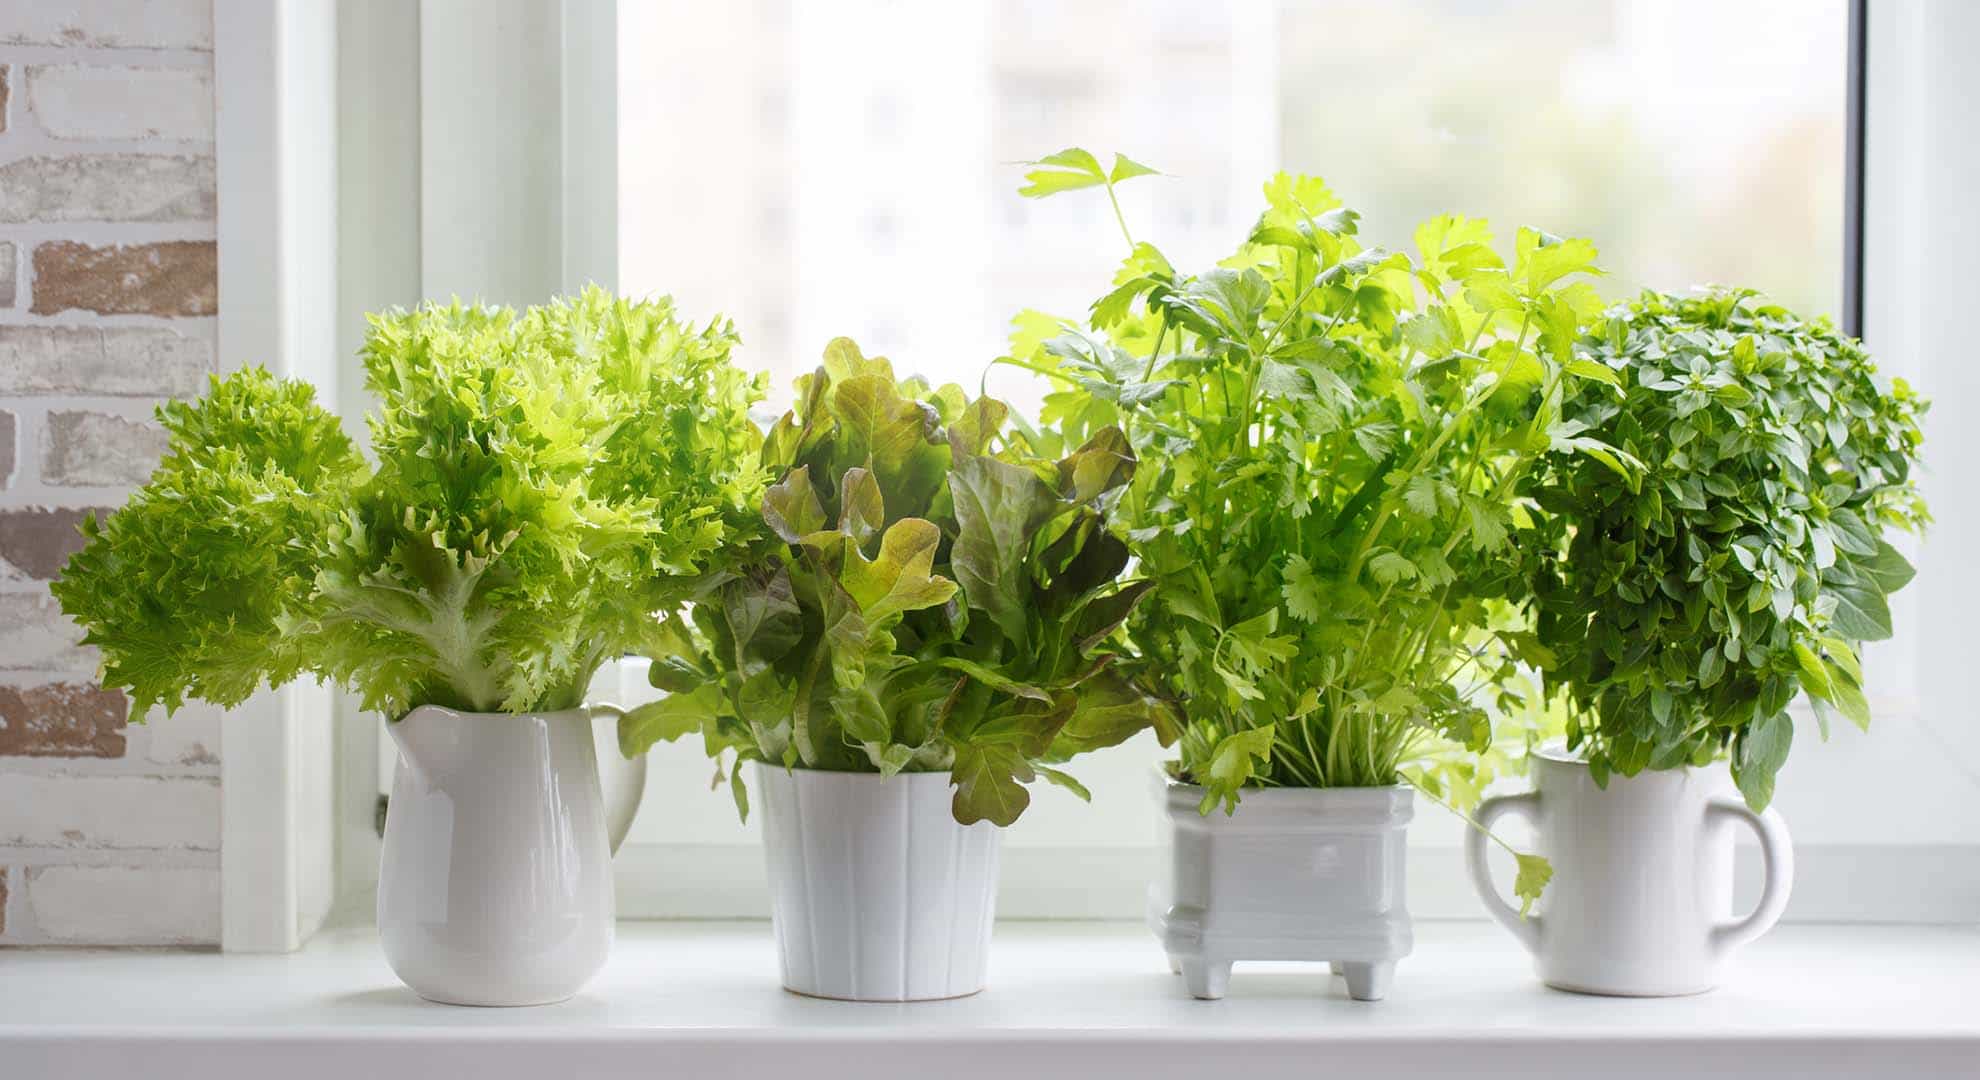 Photo of different herbs and lettuce in white vessels growing on a windowsill